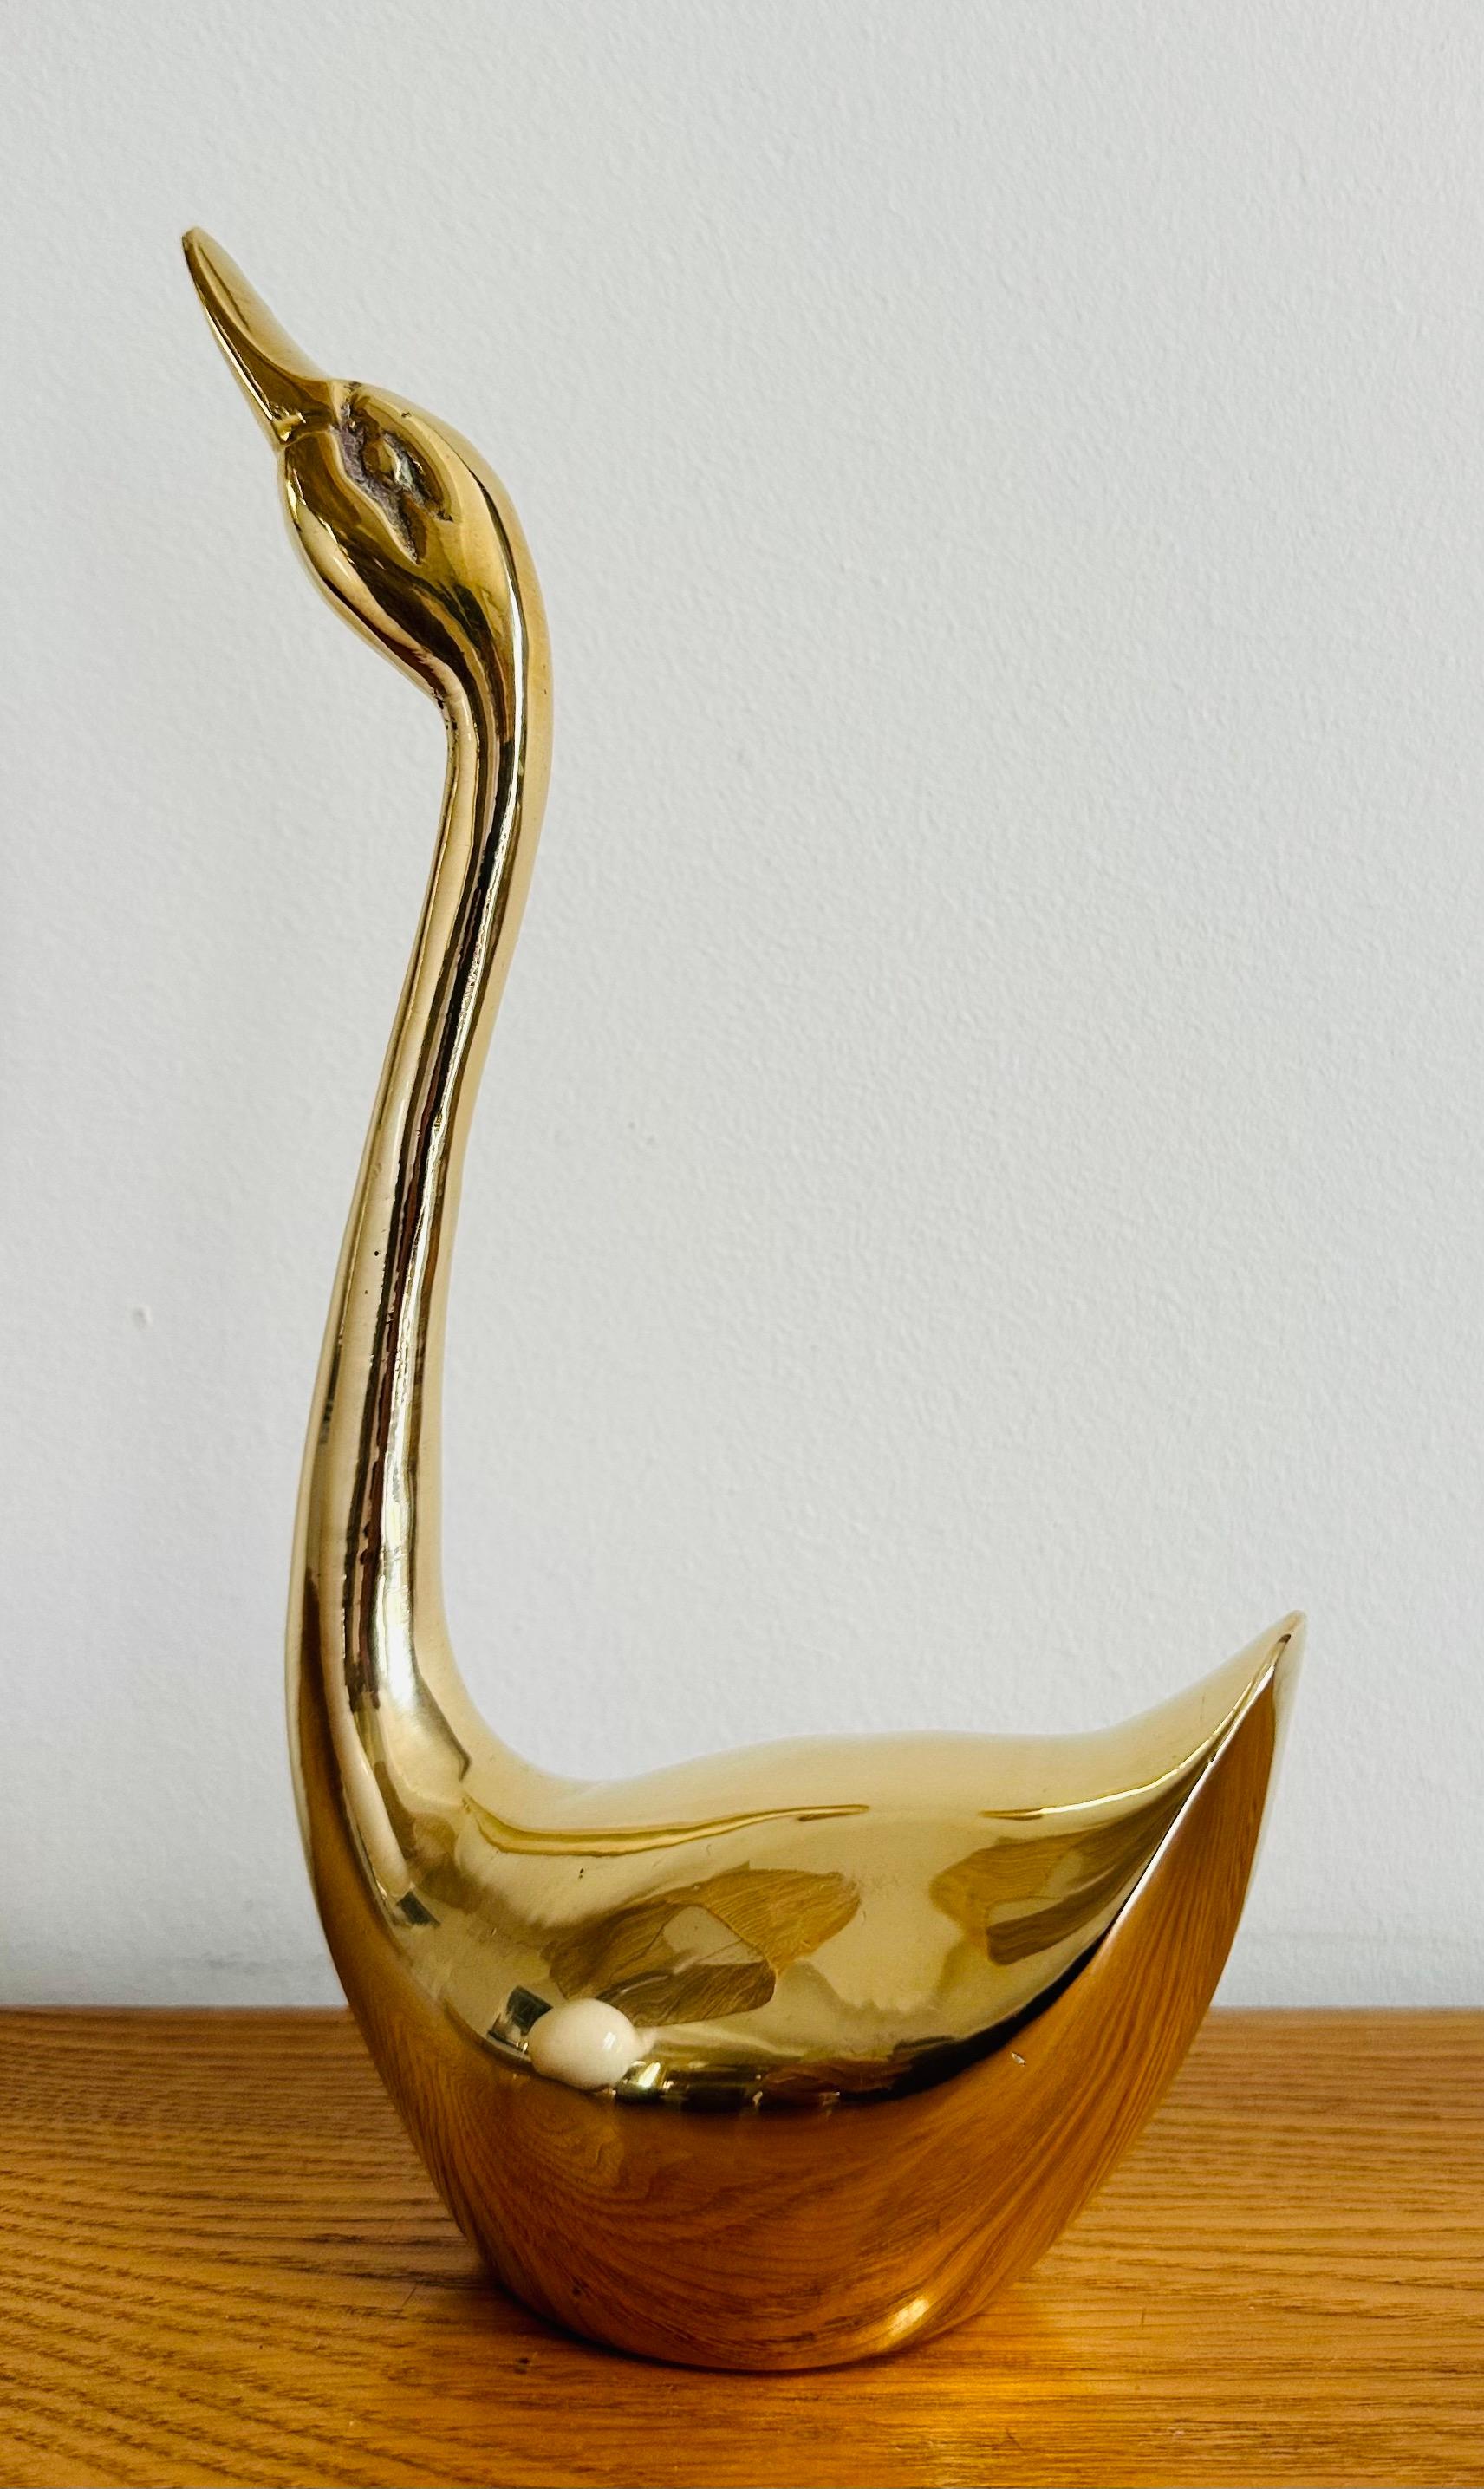 20th Century Vintage 1970s French Polished Brass Elegant Decorative Swan Paperweight